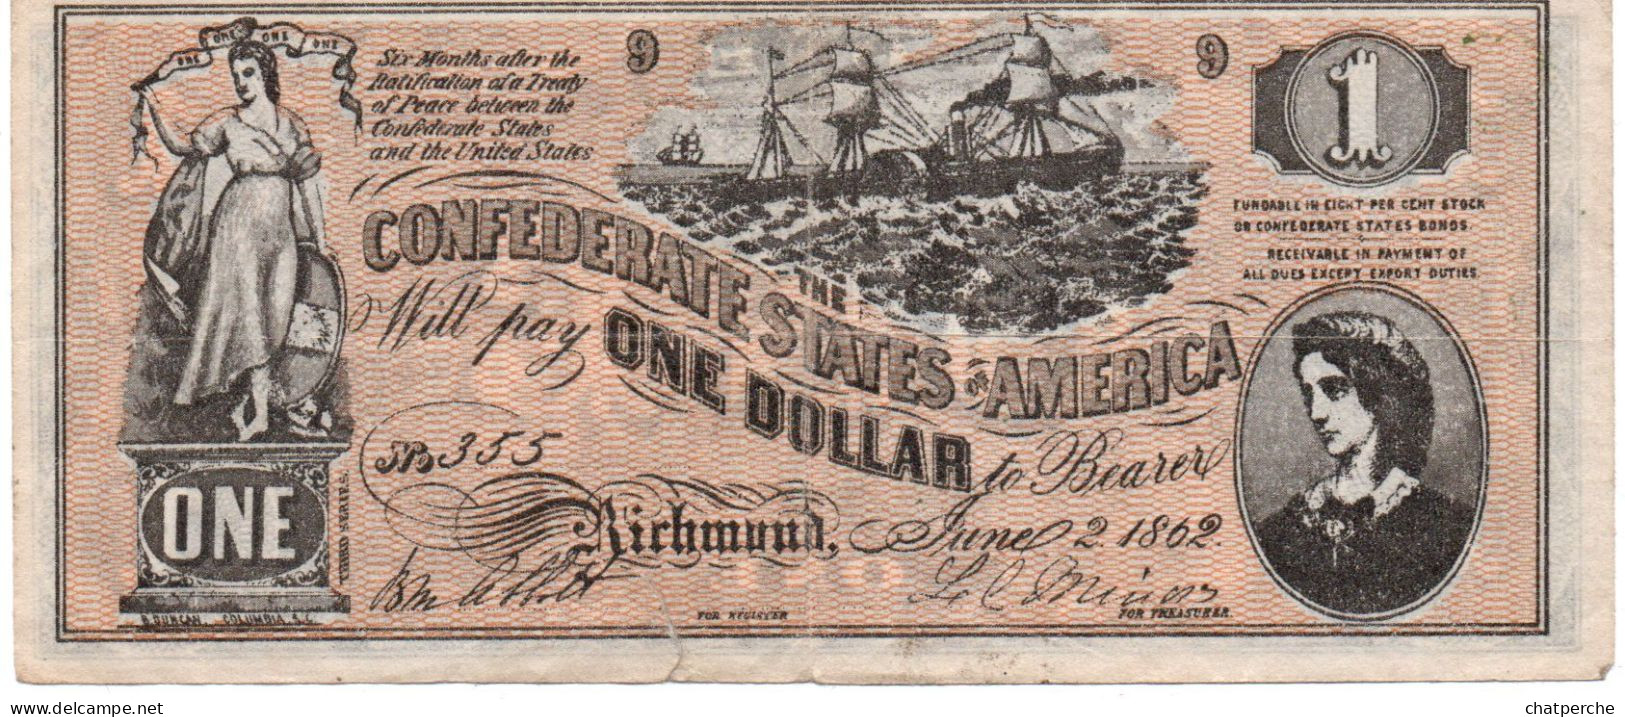 POUR COLLECTIONNEUR FAUX-BILLET FAKE 1 ONE DOLLAR THE CONFEDERATE UNITED STATES OF AMERICA - Colecciones Lotes Mixtos